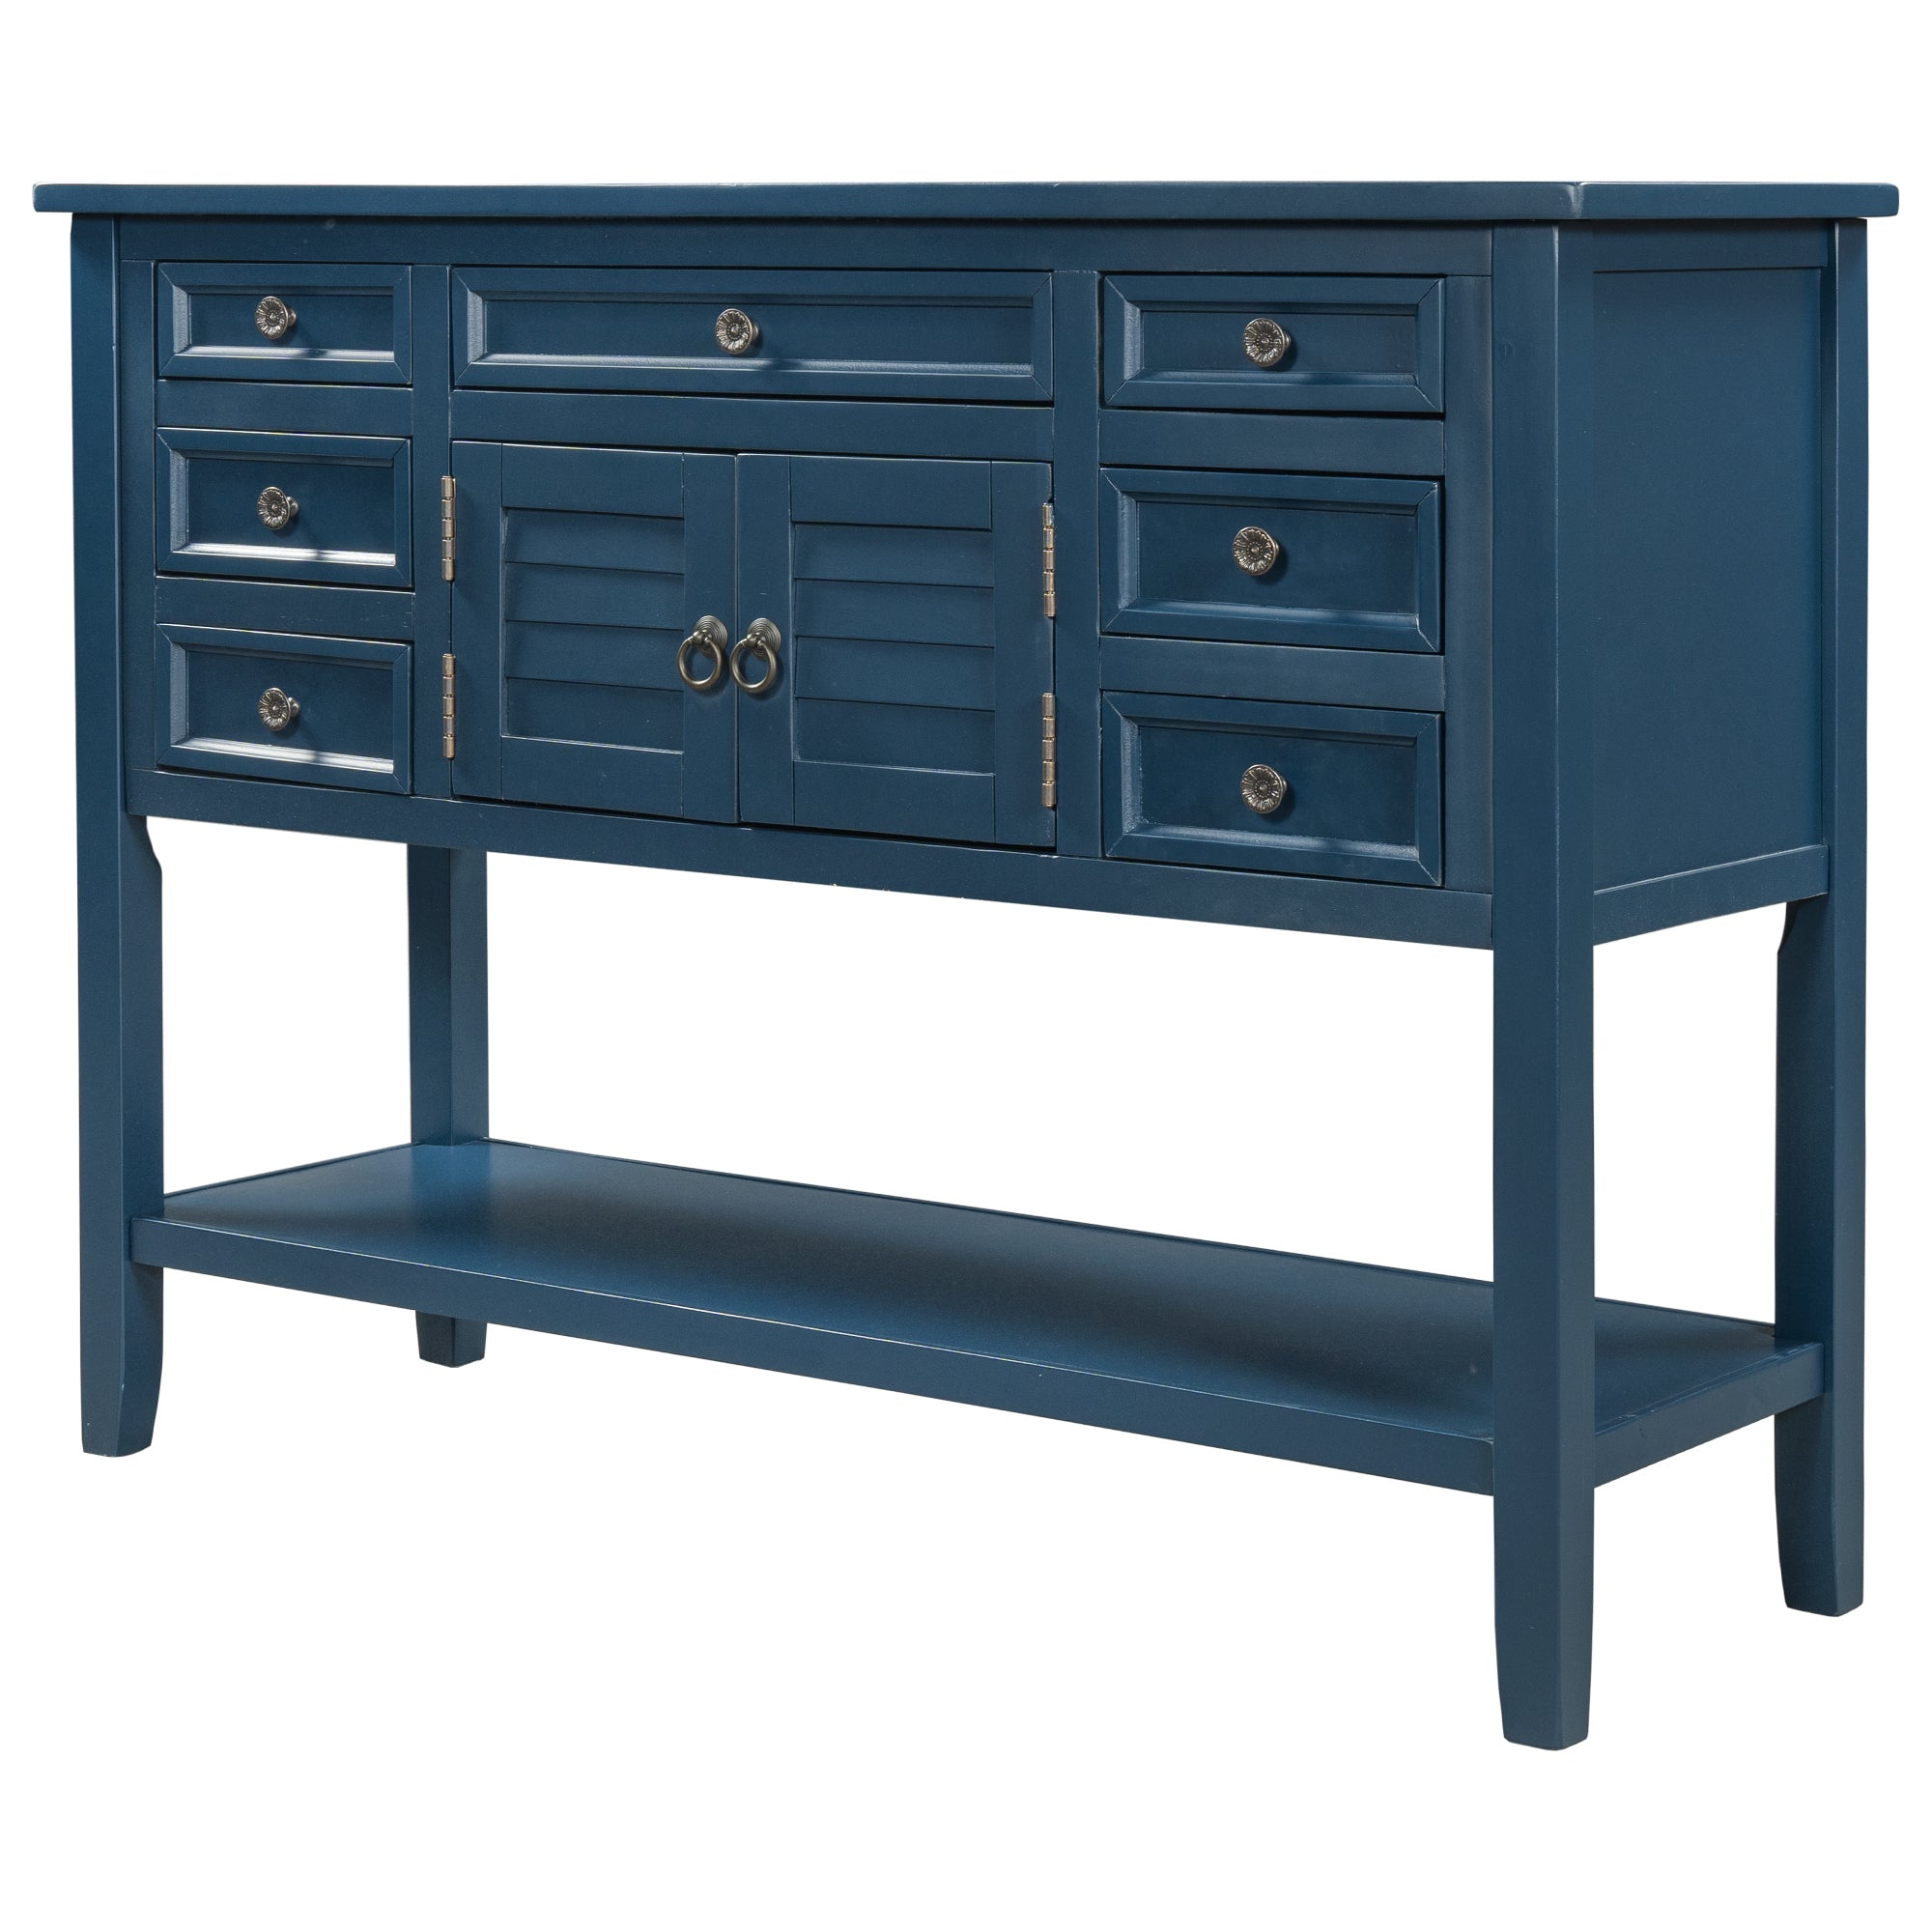 45'' Modern Console Table Sofa Table for Living Room with 7 Drawers (Blue)